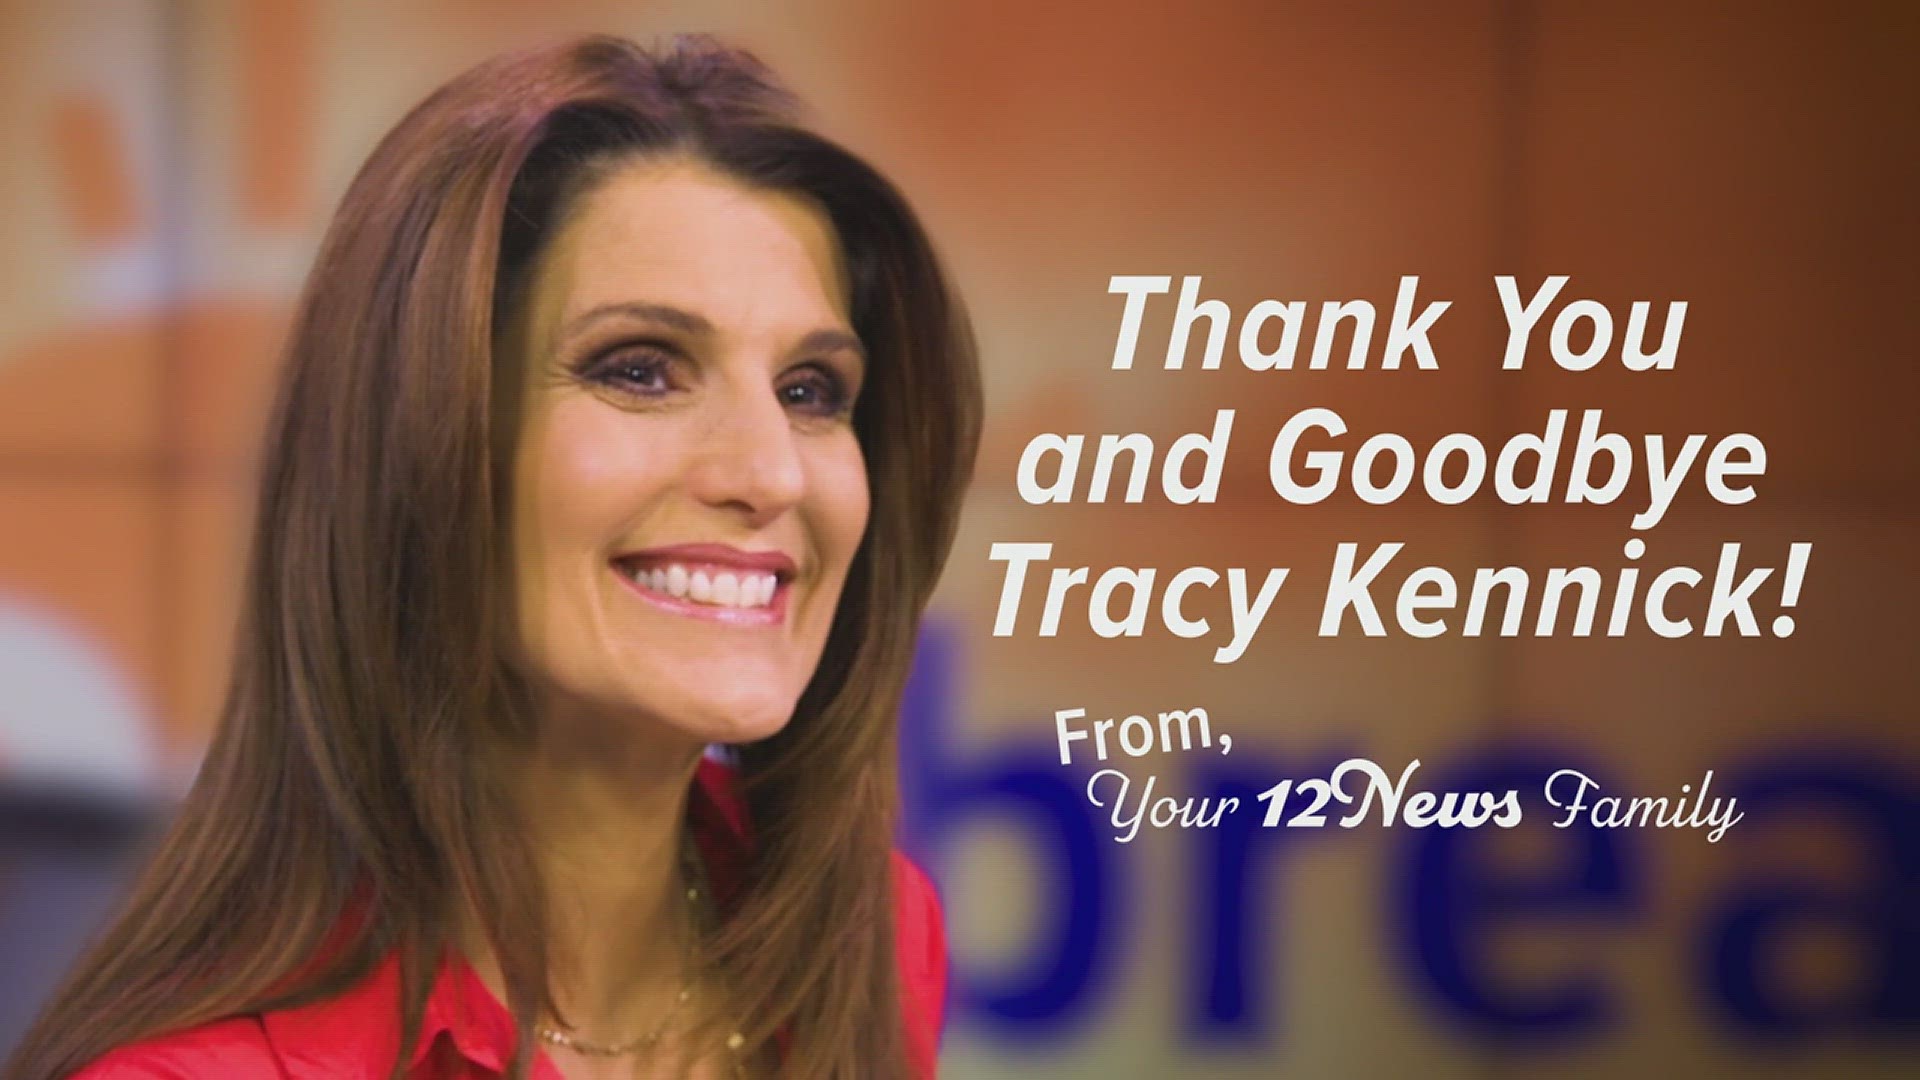 Tracy Kennick has served the Southeast Texas community as a 12News anchor since 1996 and will continue to serve the area in her new job at the City of Beaumont.